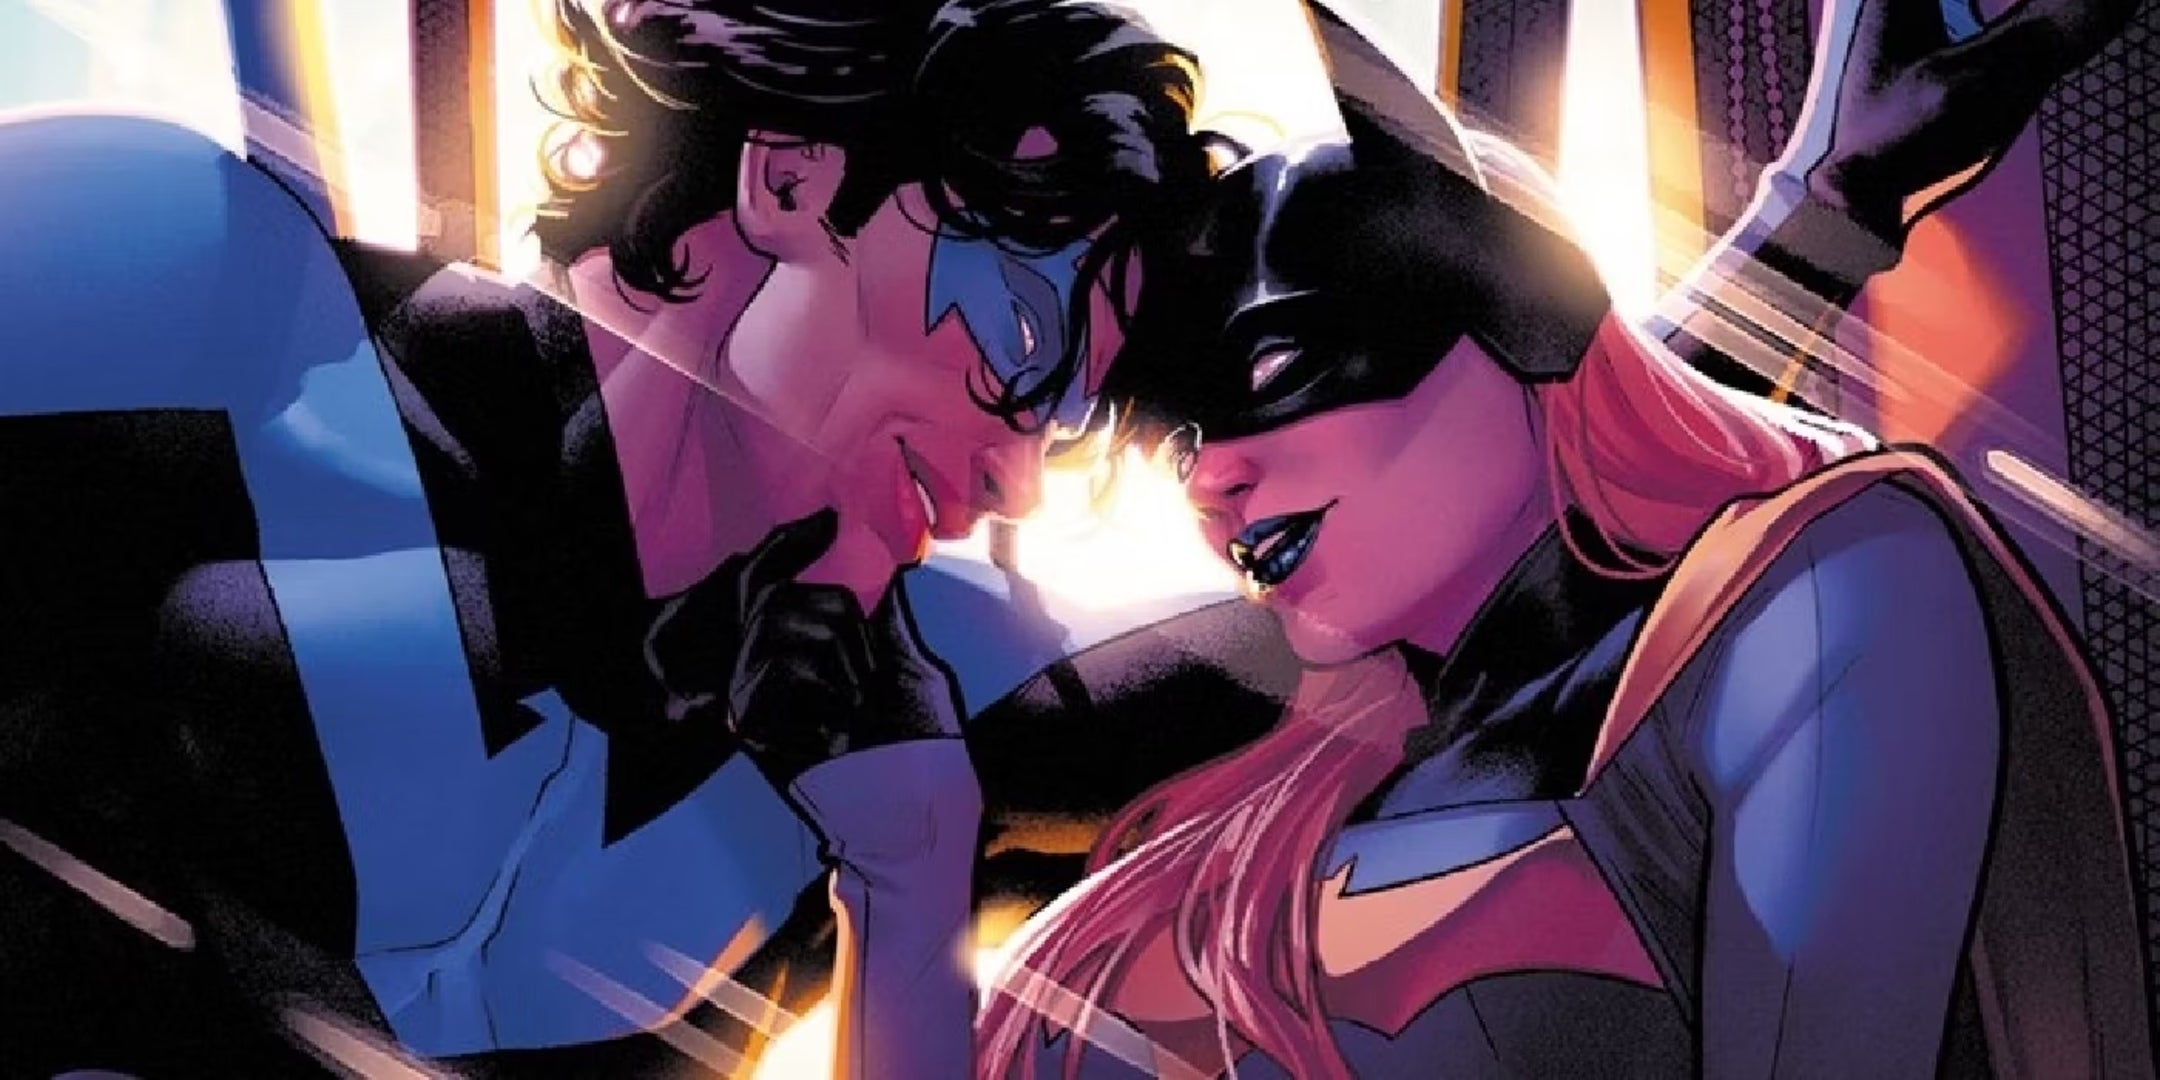 Image of Nightwing and Batgirl leaning close to each other and smiling